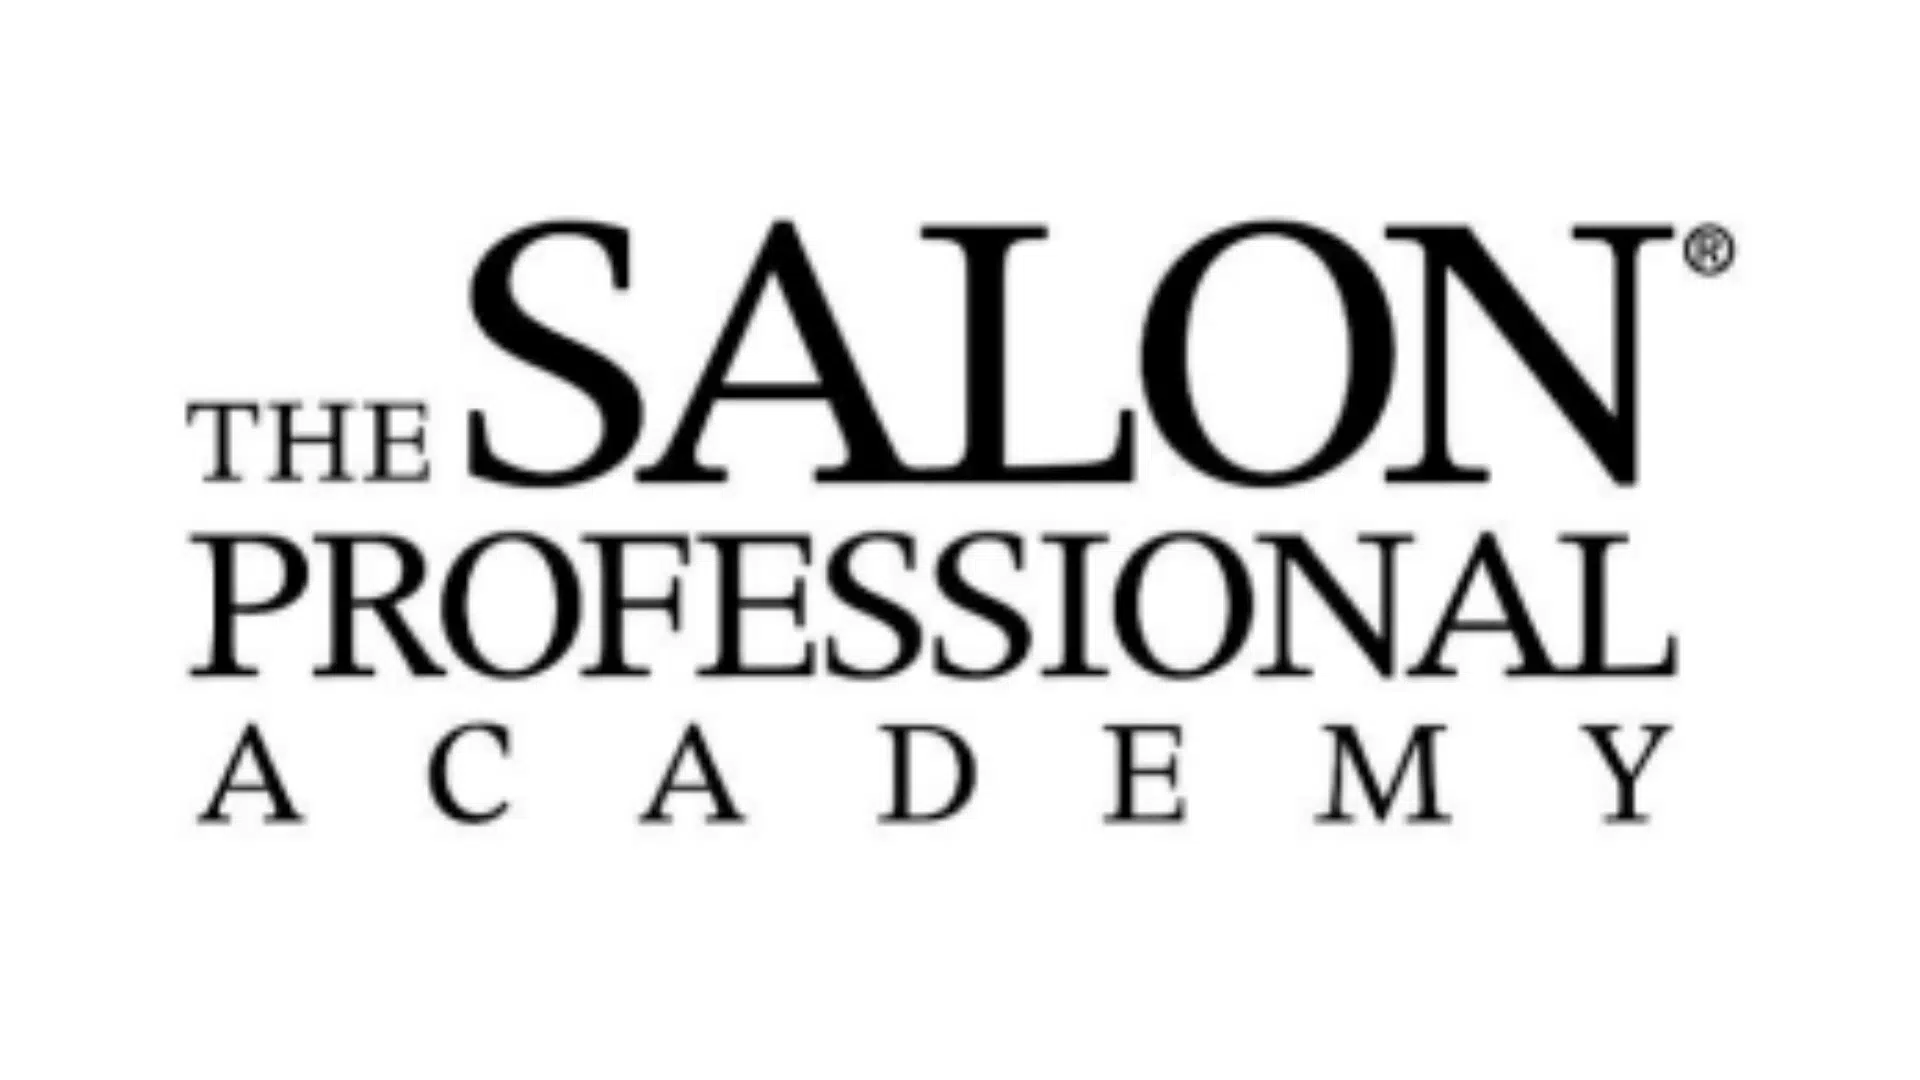 1. The Salon Professional Academy - wide 2